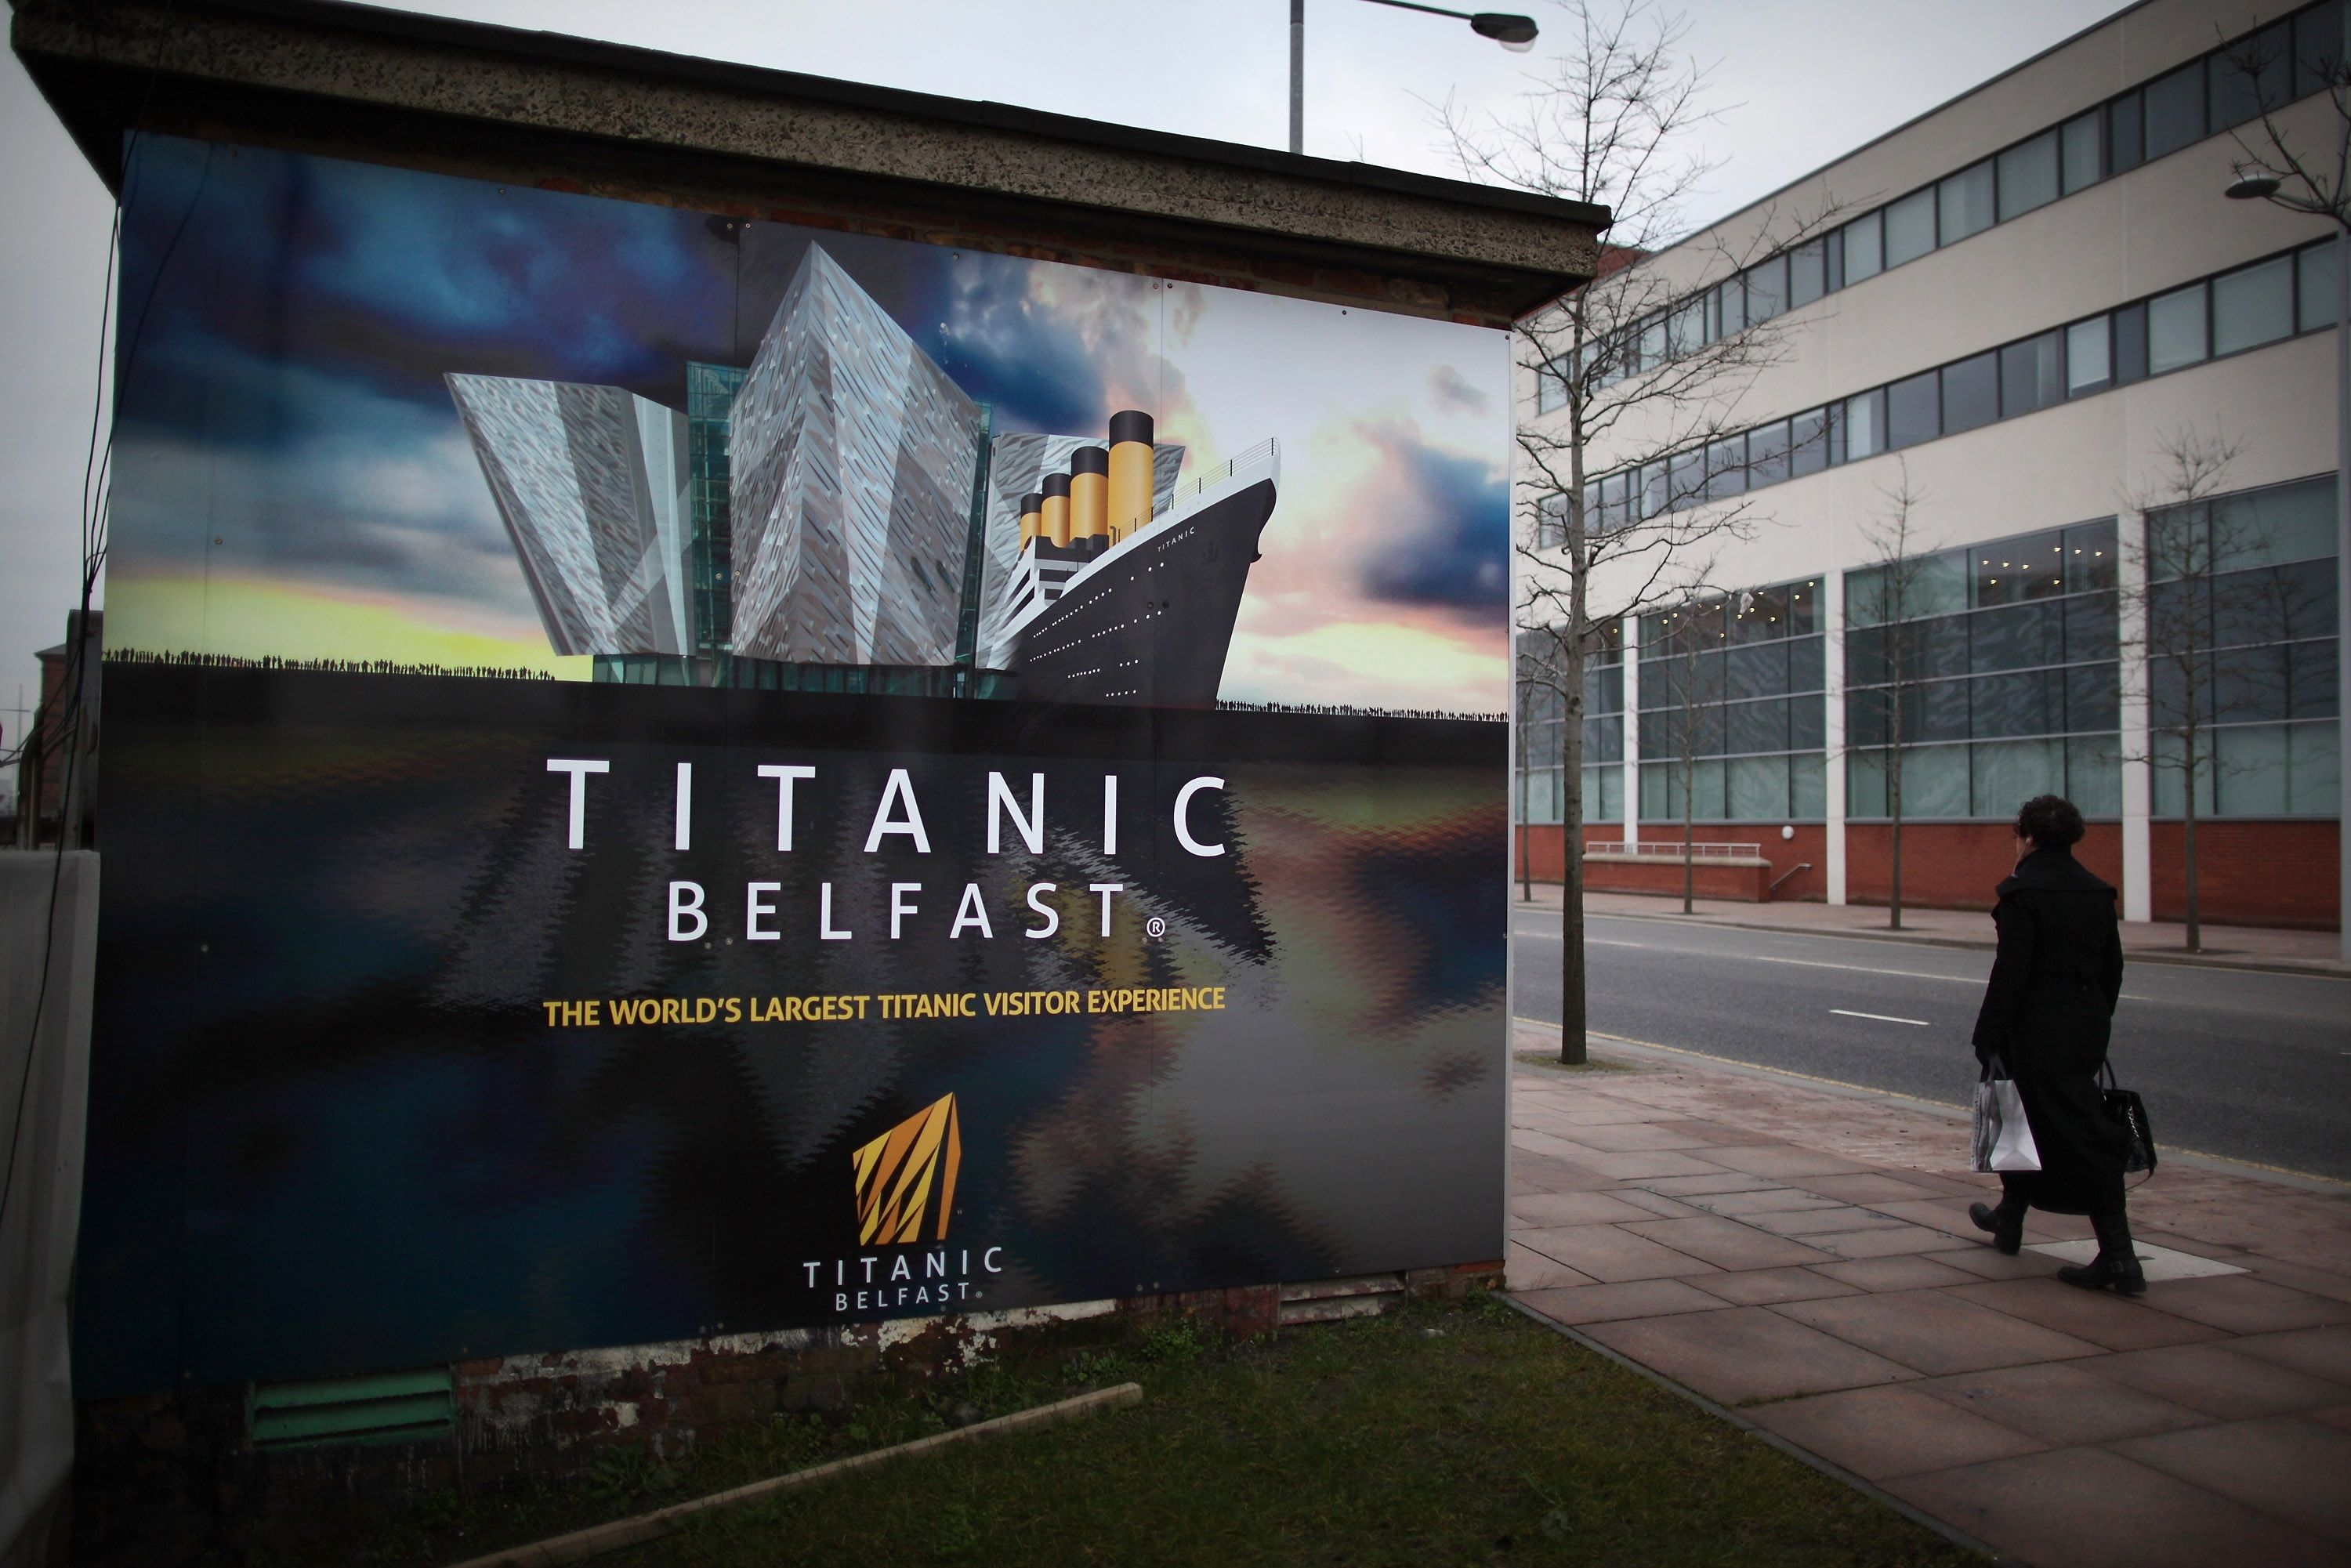 BELFAST, NORTHERN IRELAND - MARCH 13: A woman walks past a hoarding advertising the Titanic Belfast attraction in The Titanic Quarter on March 13, 2012 in Belfast, Northern Ireland. Belfast's Titanic Quarter is a regeneration area on the original site of the Harland and Wolff shipyard - birthplace of RMS Titanic. The Titanic Belfast Experience is a new £90 million visitor attraction which opens on March 31, 2012. The ill-fated passenger liner sank after hitting an iceberg in the Atlantic on the night of April 15, 1912 with the loss of 1517 lives. (Photo by Peter Macdiarmid/Getty Images)